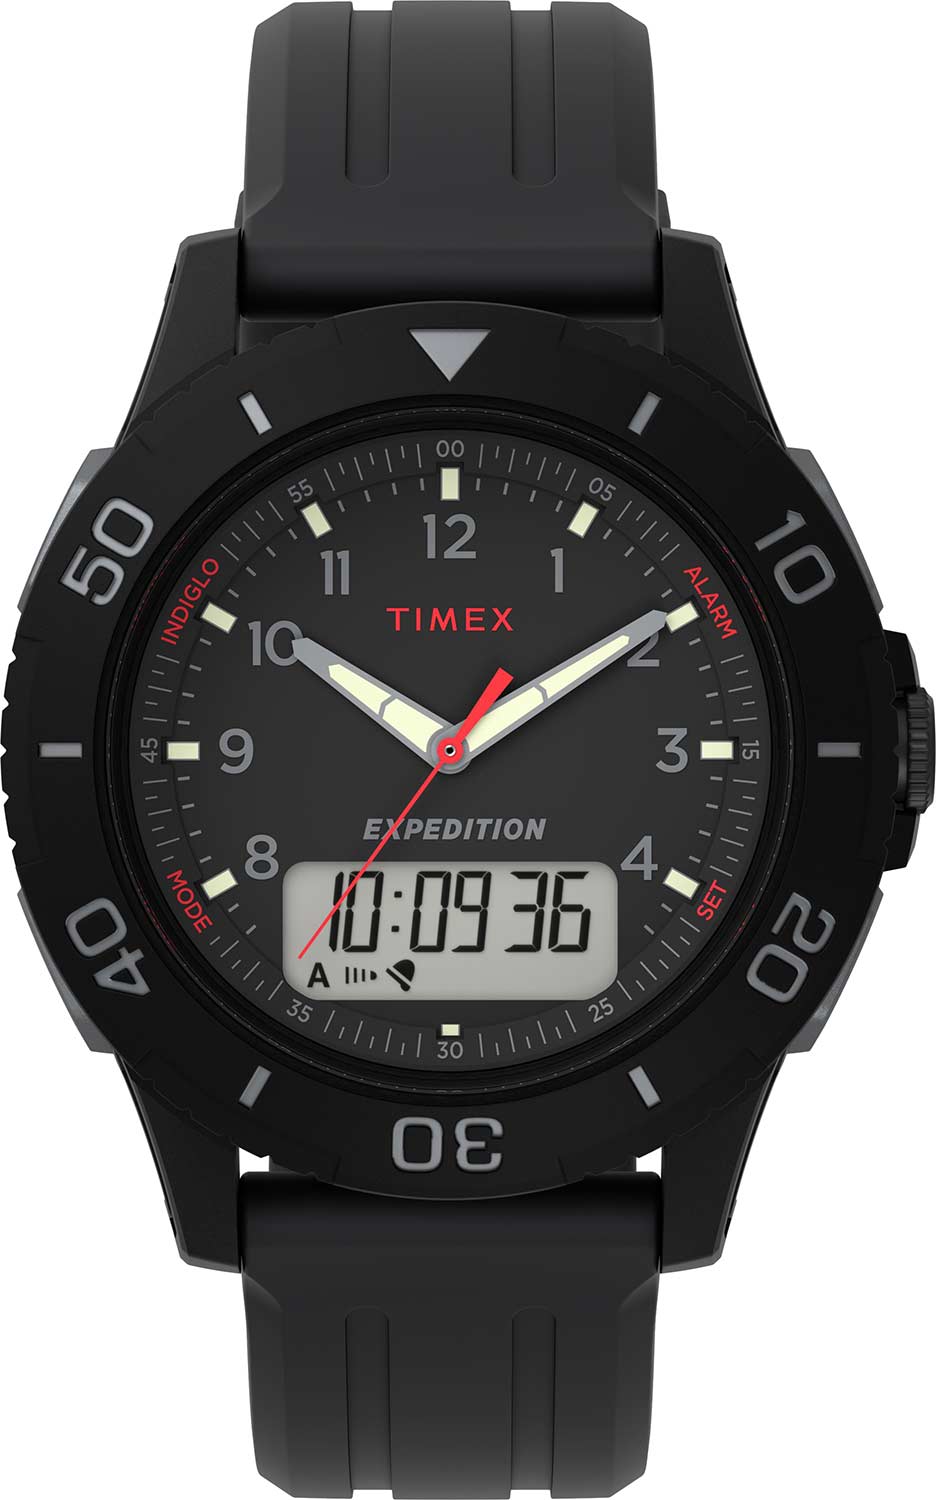   Timex Expedition TW4B18200  